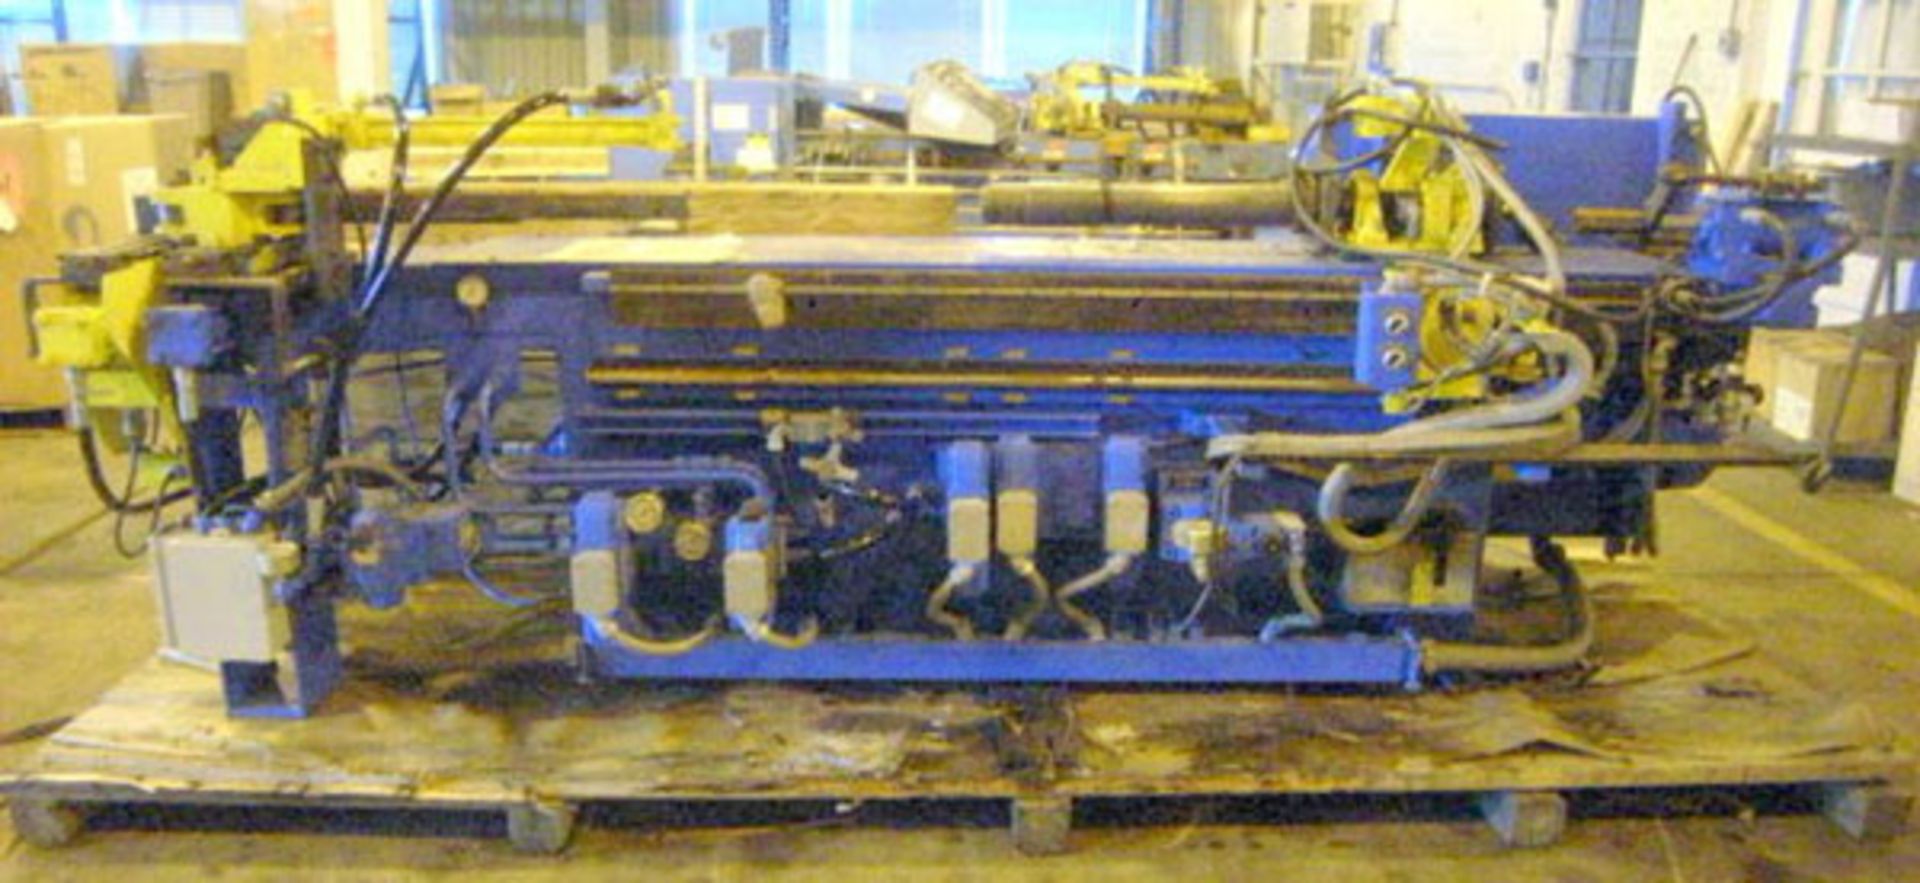 1-1/2'' Pines Horizontal Hydraulic Tube Bender, Mdl: #1, Located in Painesville, OH - Image 2 of 9